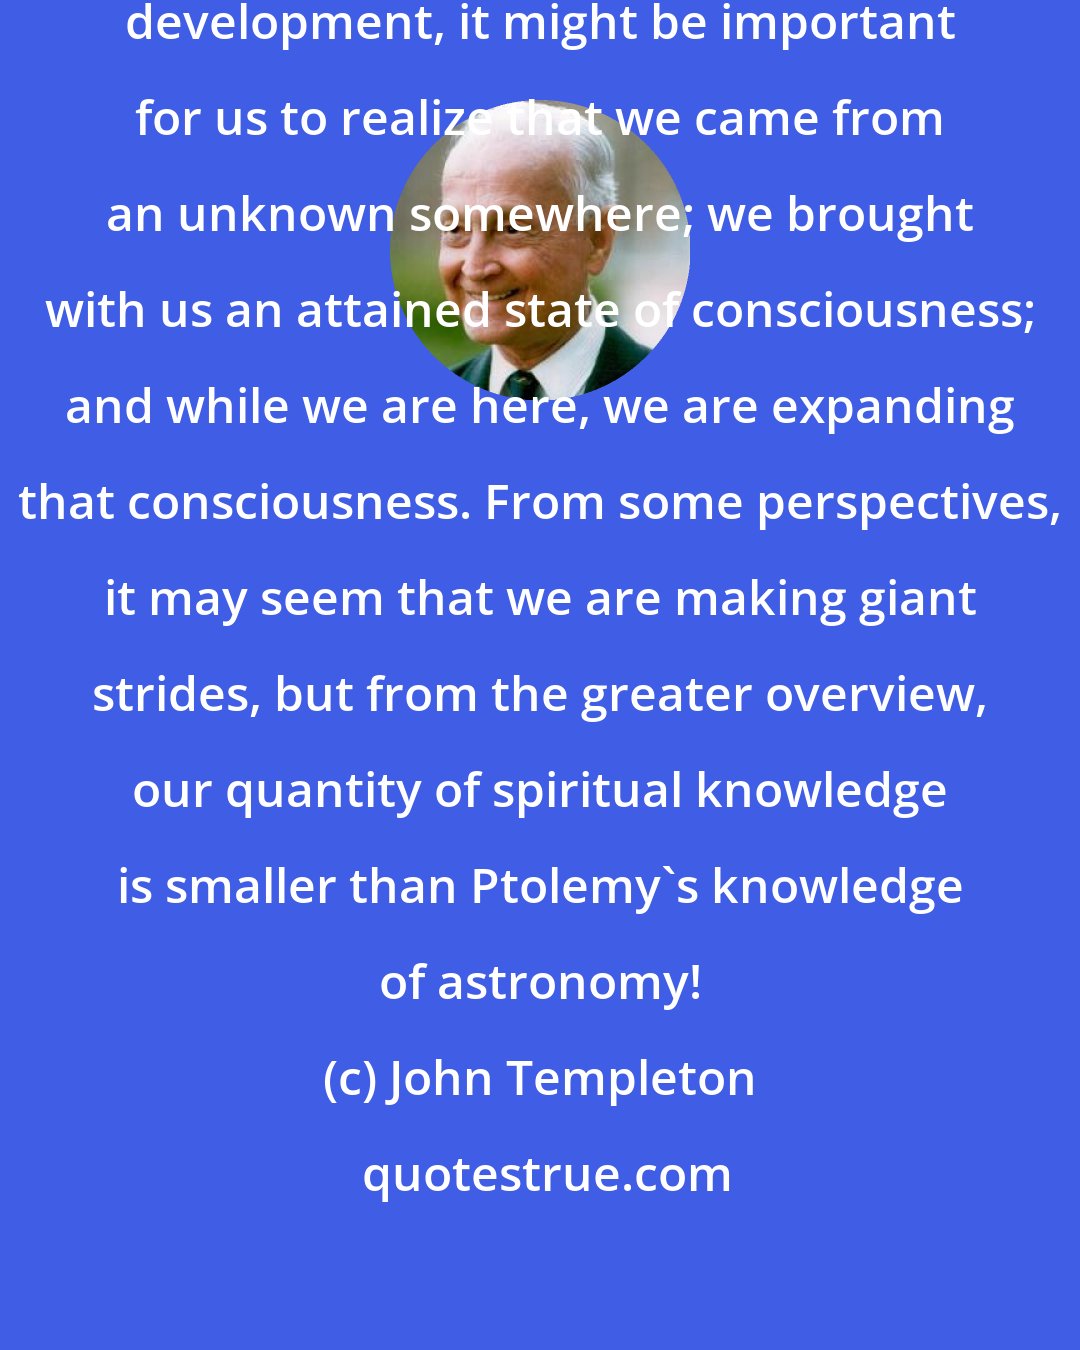 John Templeton: From the standpoint of our spiritual development, it might be important for us to realize that we came from an unknown somewhere; we brought with us an attained state of consciousness; and while we are here, we are expanding that consciousness. From some perspectives, it may seem that we are making giant strides, but from the greater overview, our quantity of spiritual knowledge is smaller than Ptolemy's knowledge of astronomy!